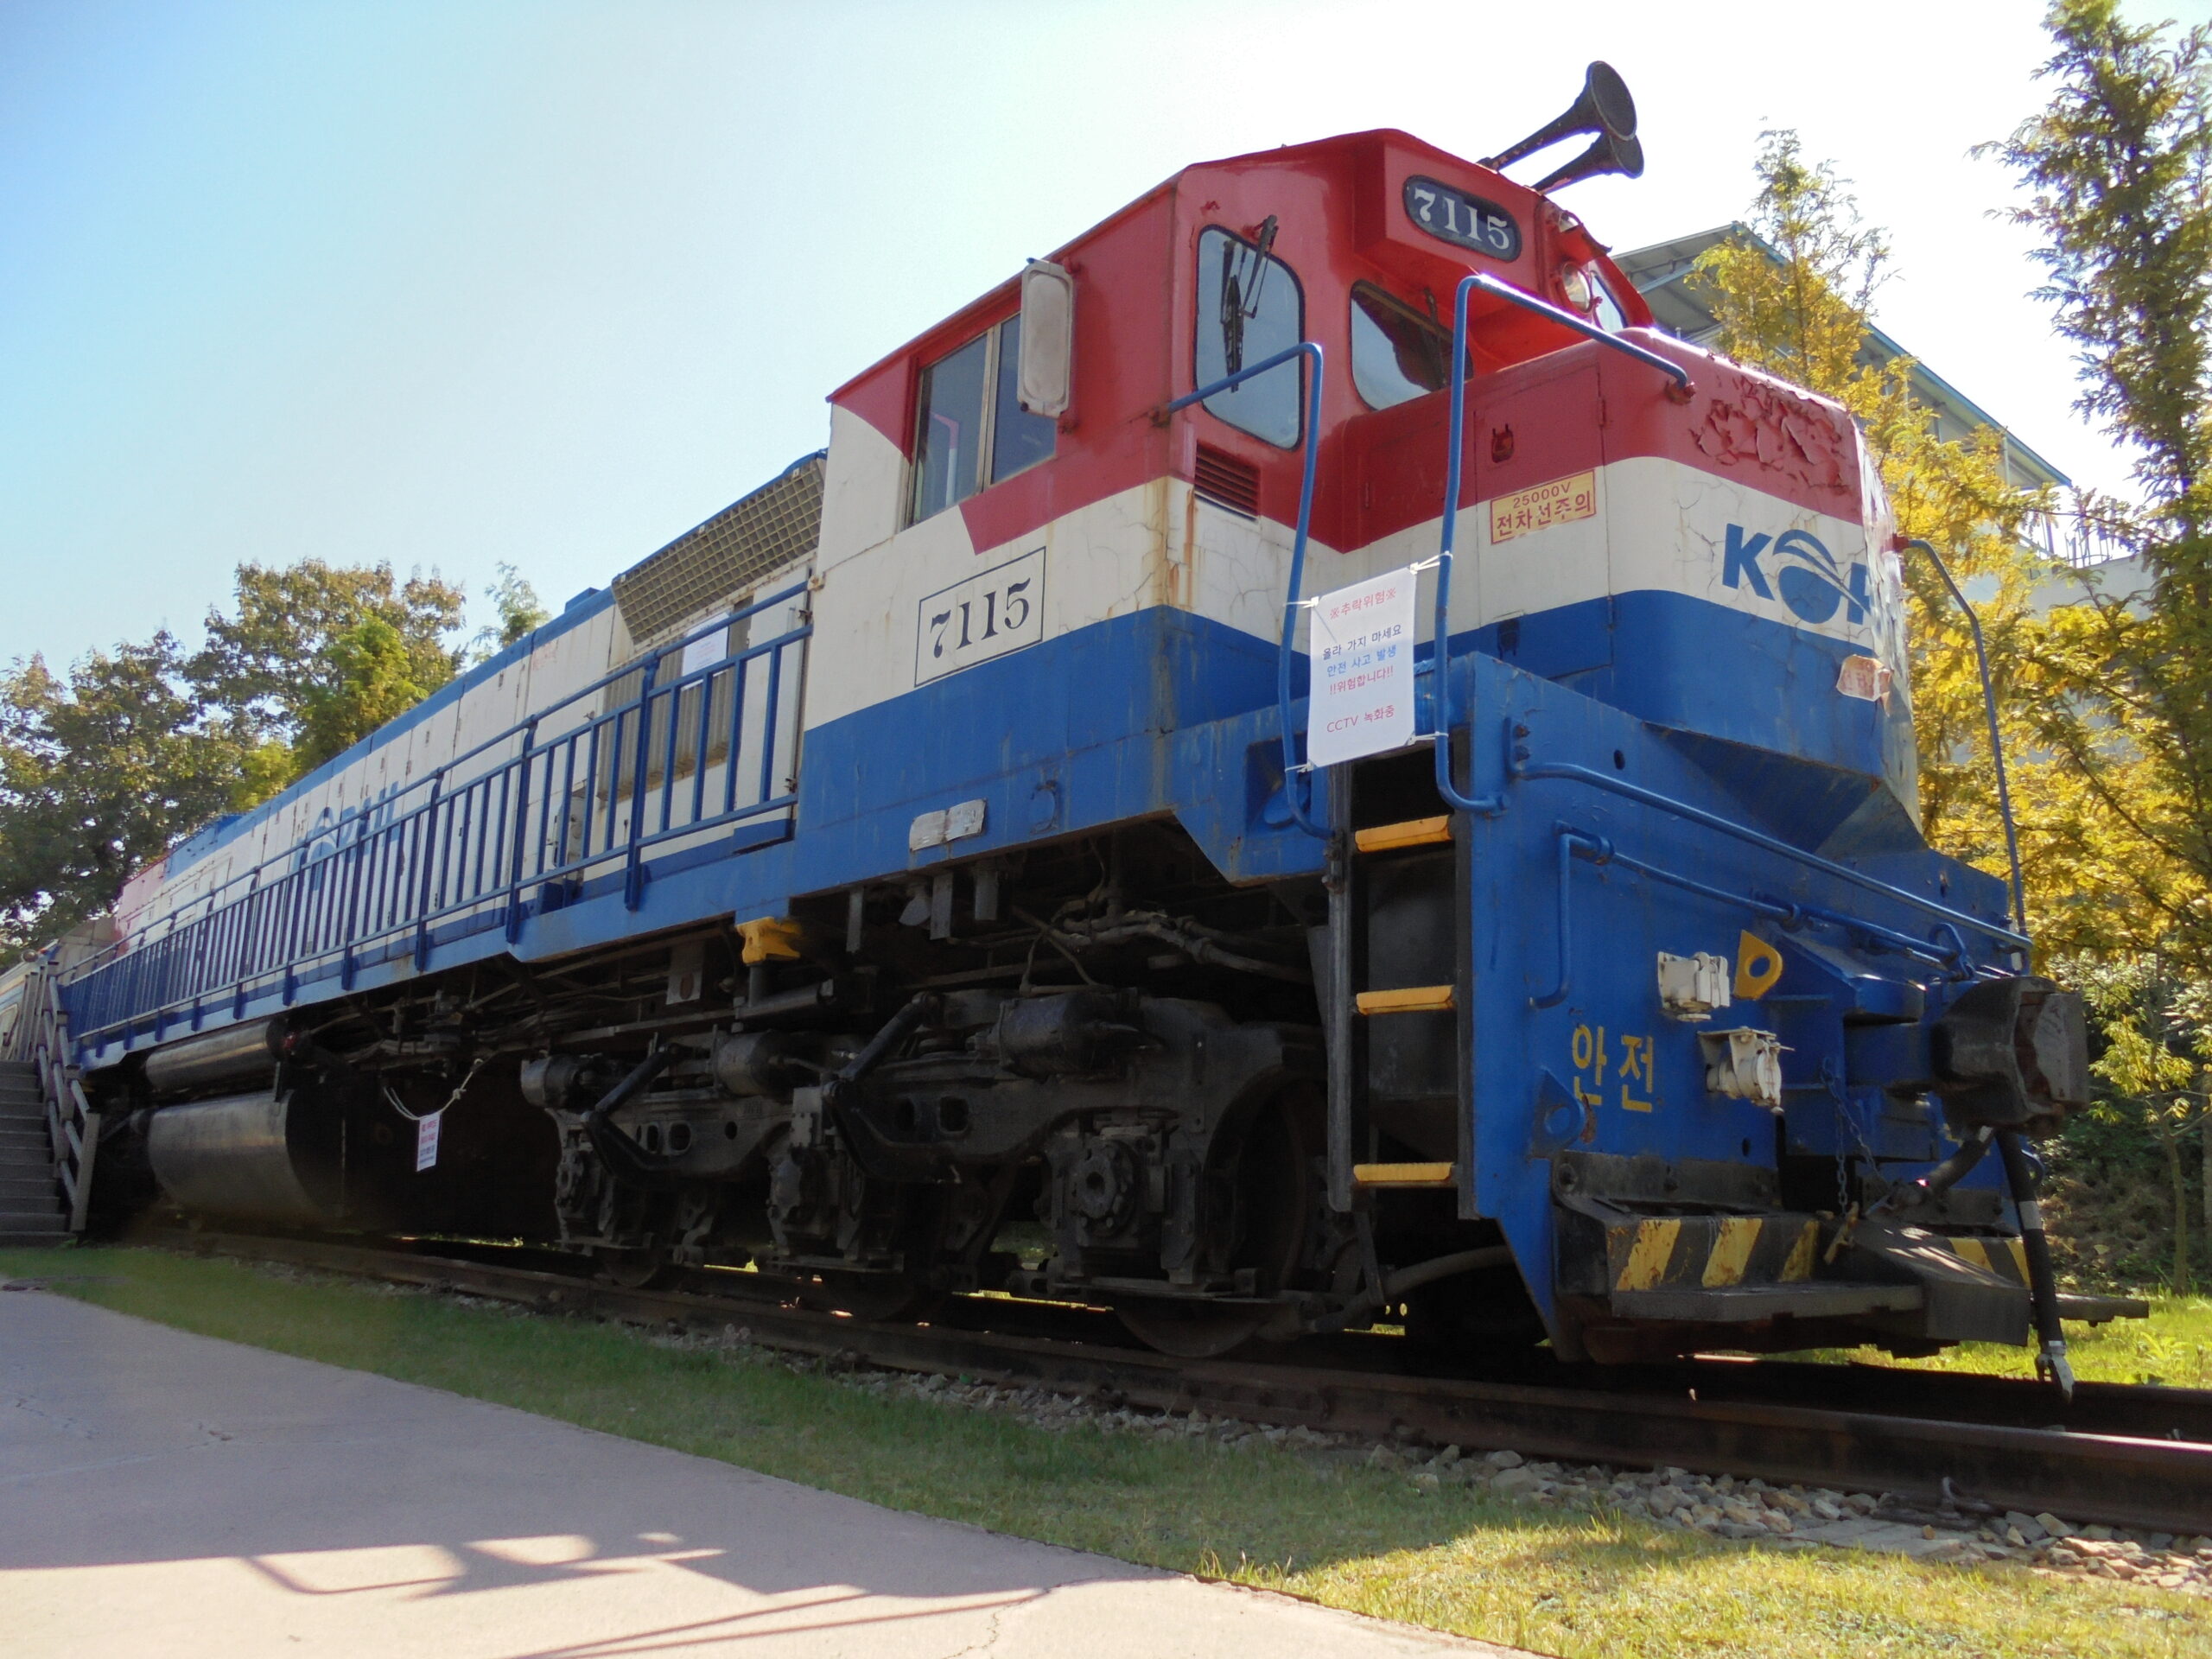 red, white, and blue locomotive relic